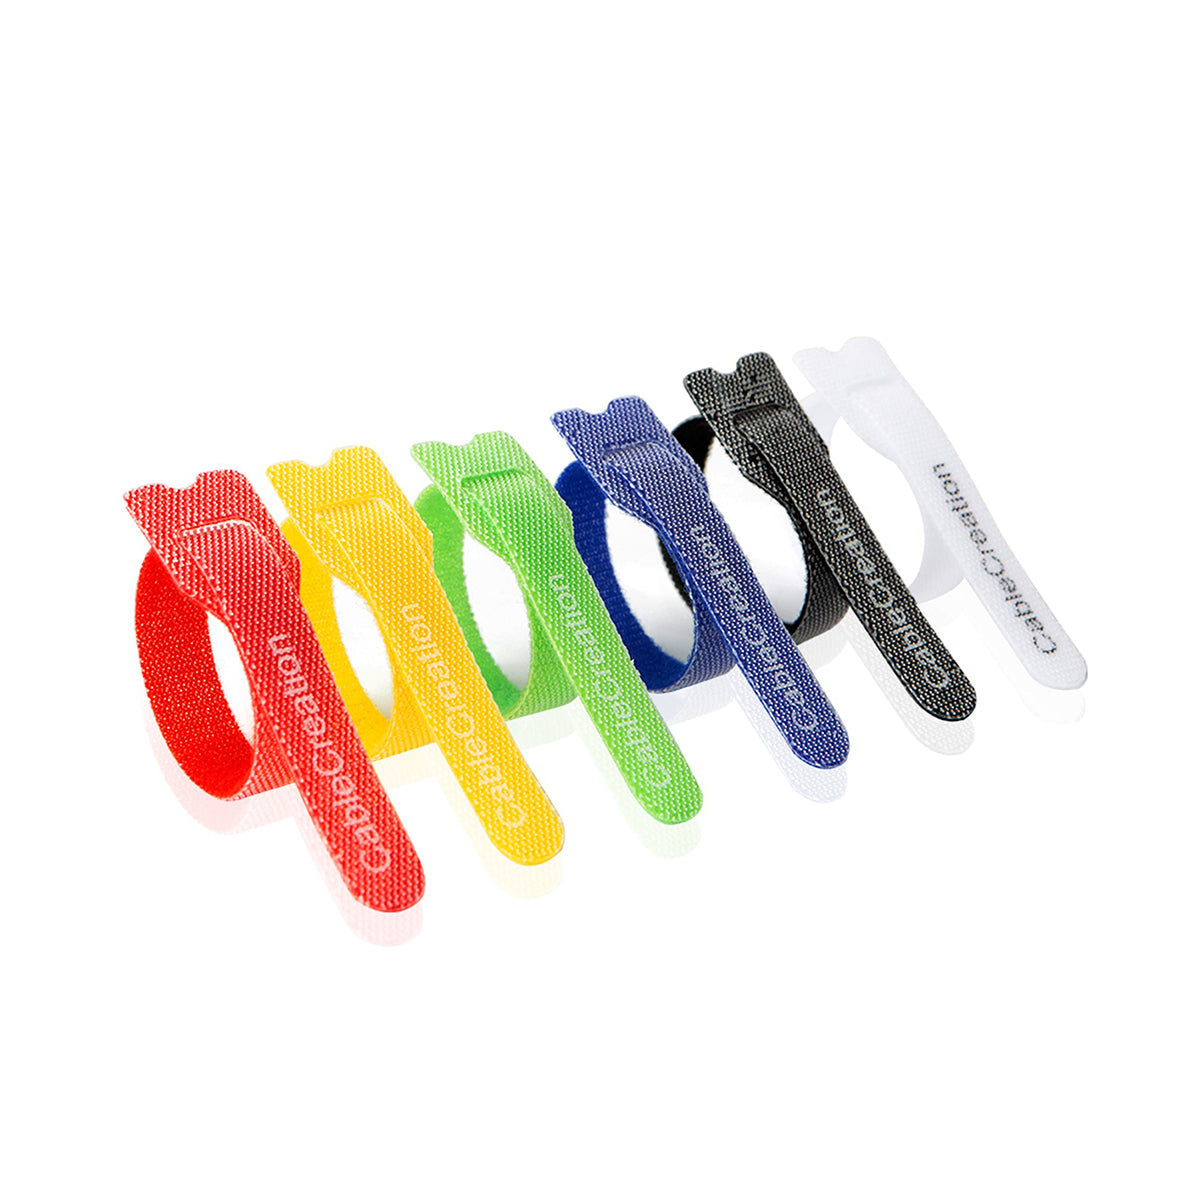 6 Color Velcro Cable Ties Management